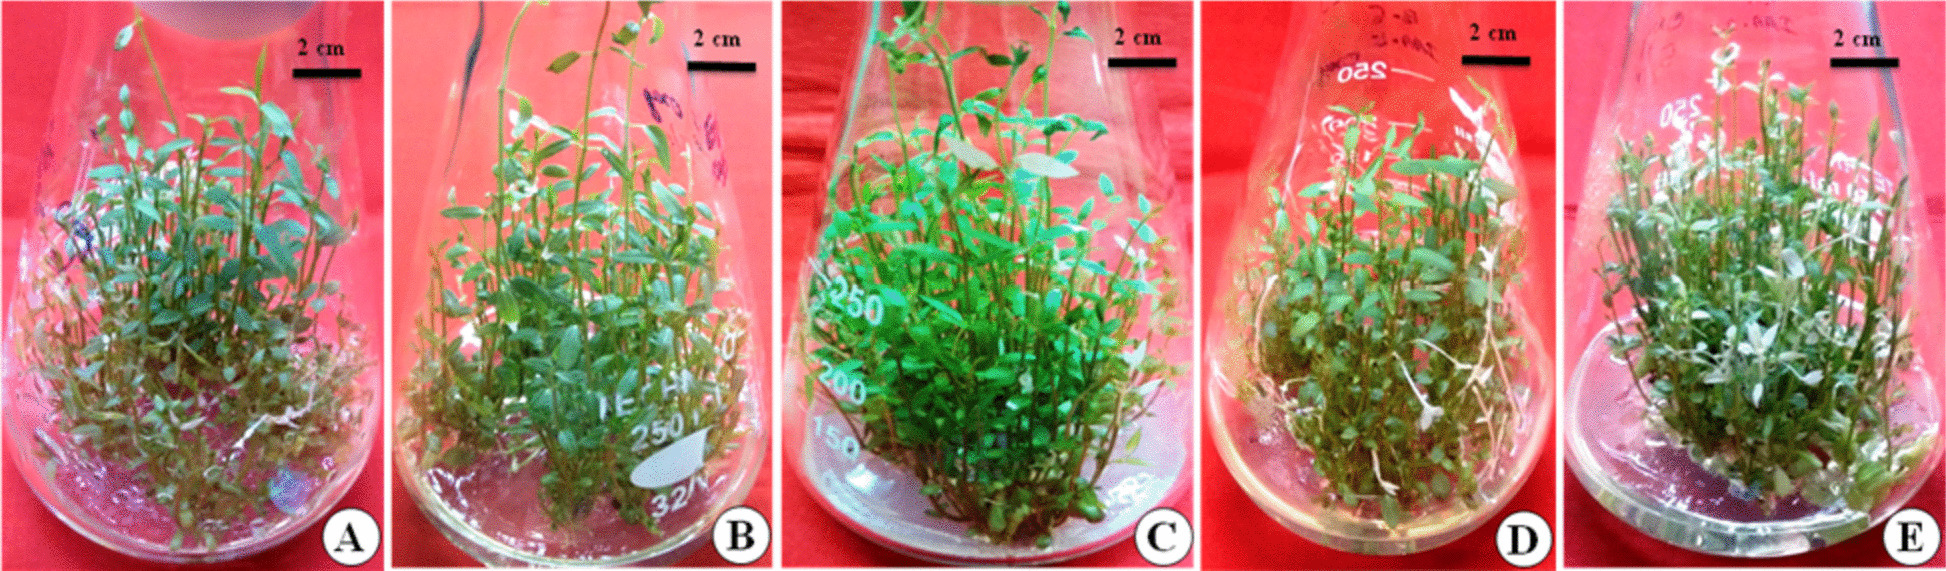 Silver nitrate mediated improvement in micropropagation and amelioration of micro-morpho-anatomical structures in Oxystelma esculentum (L.f.) Sm.